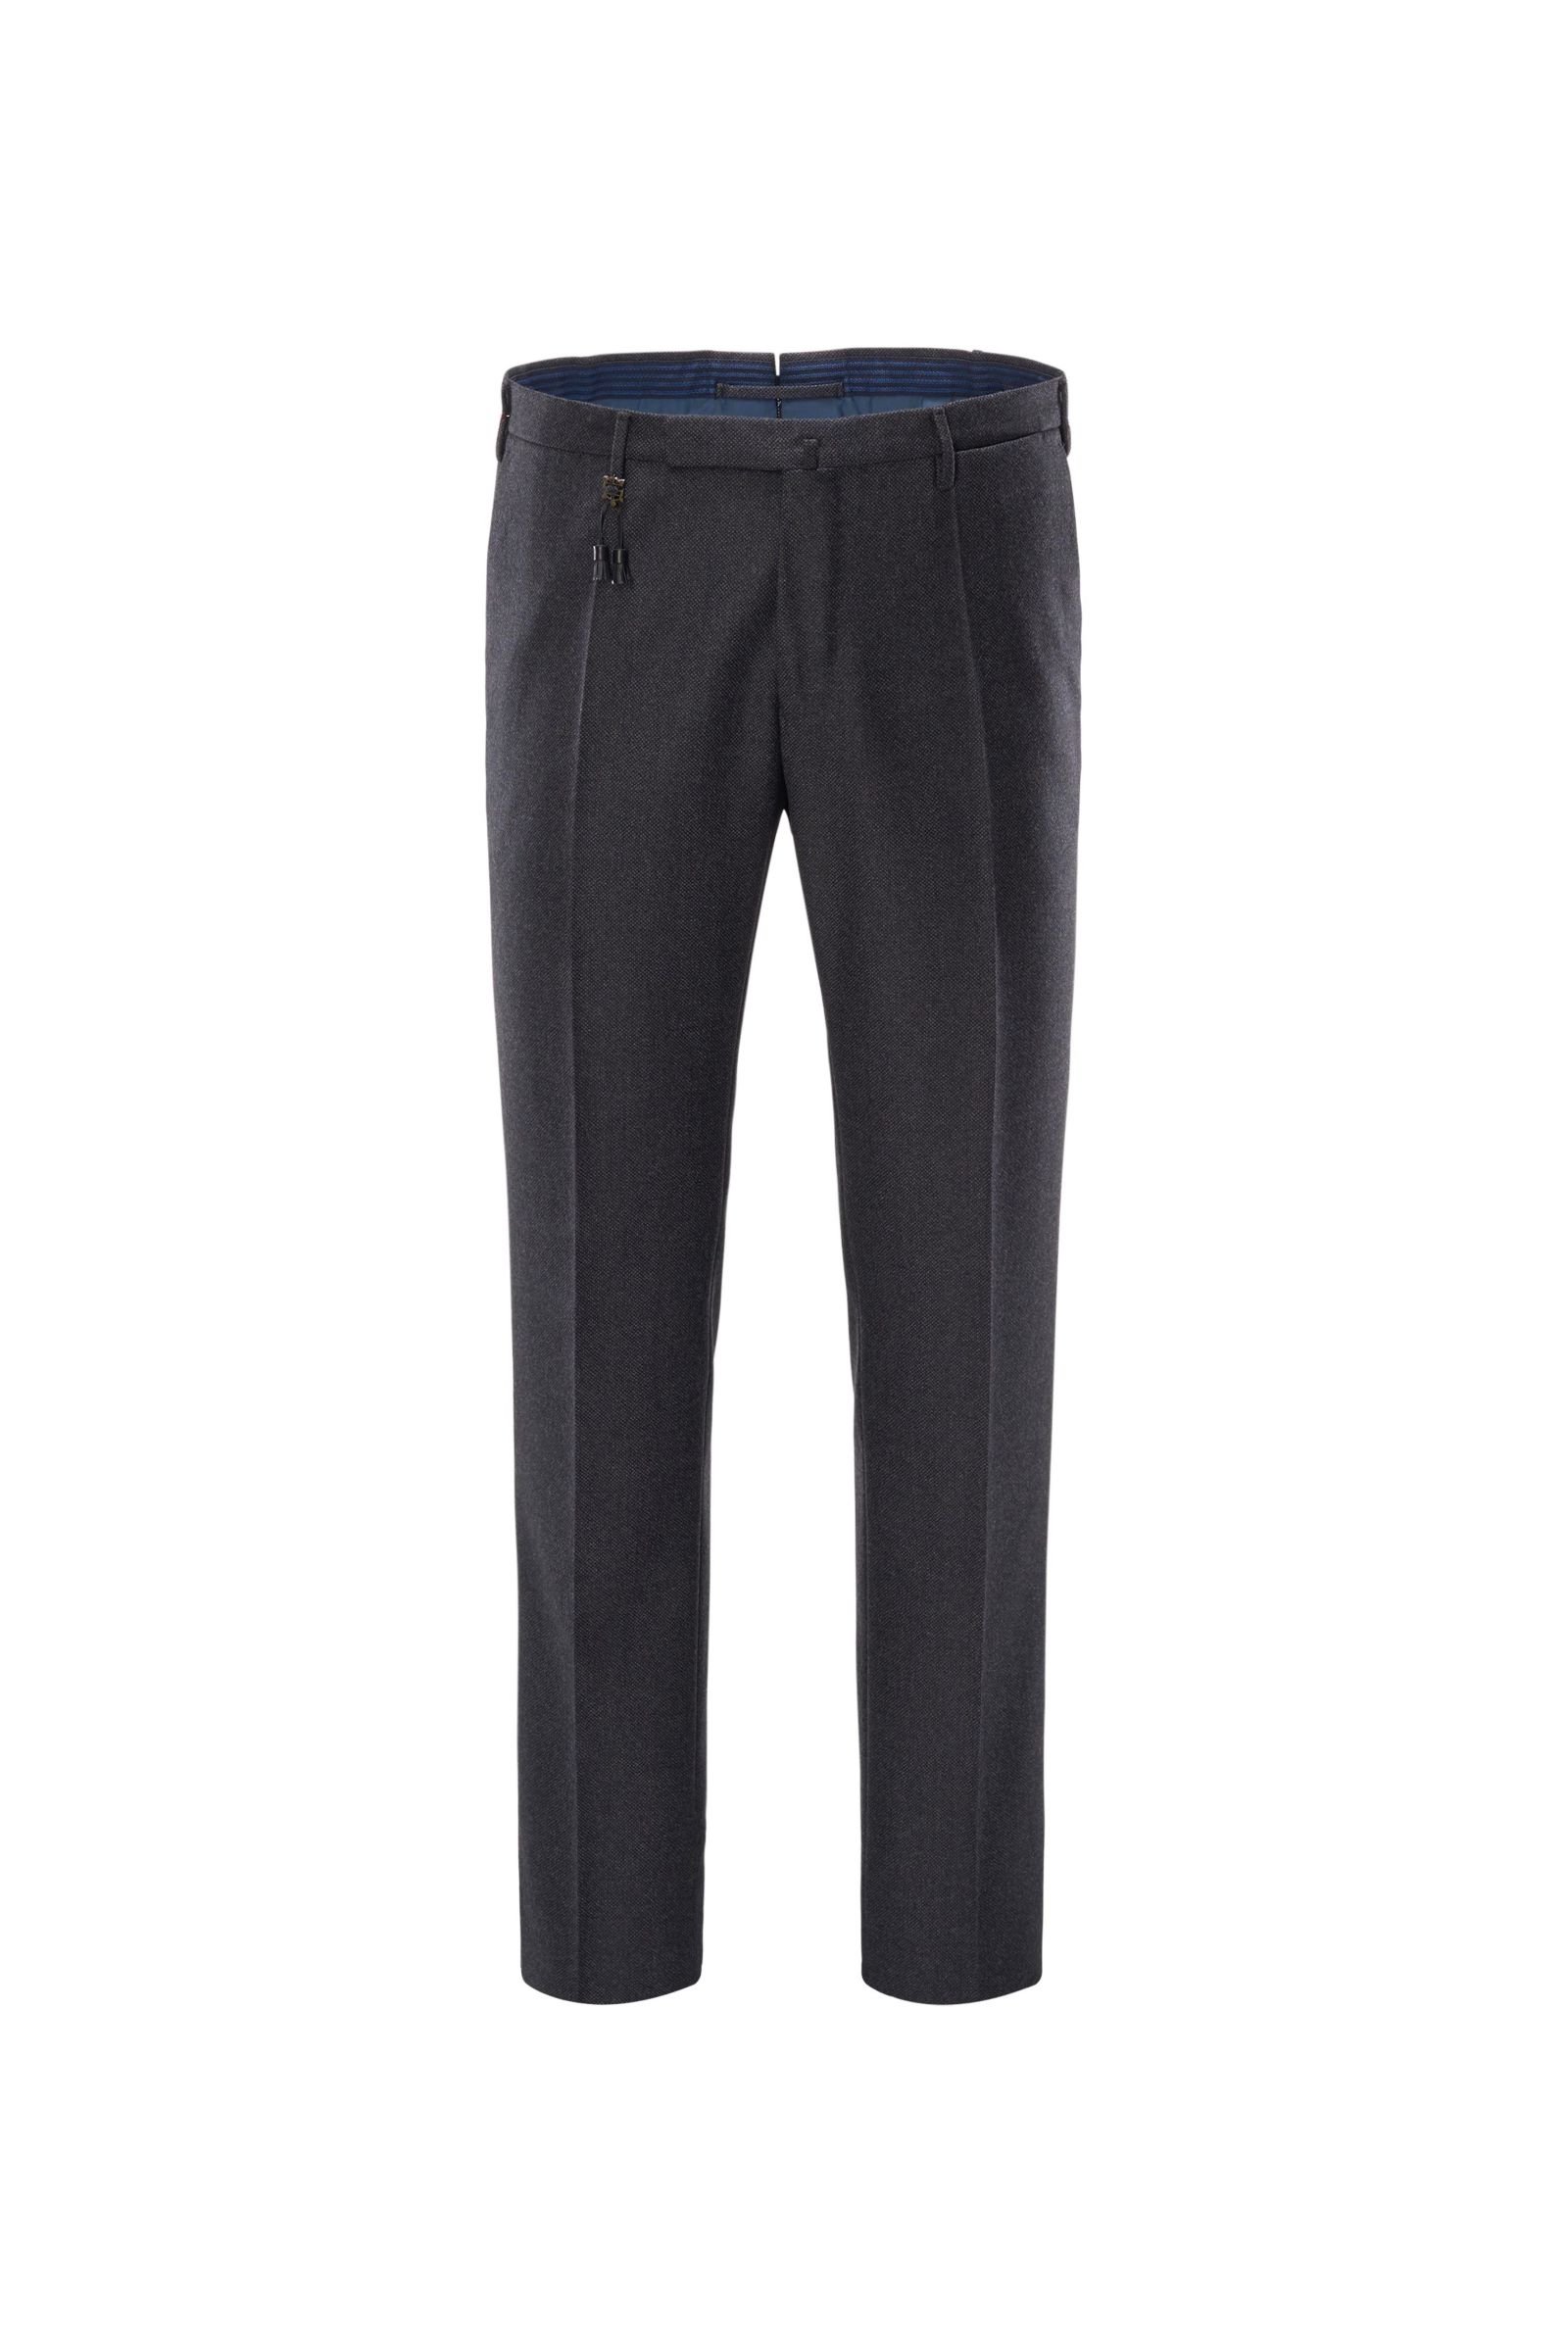 Wool trousers anthracite patterned